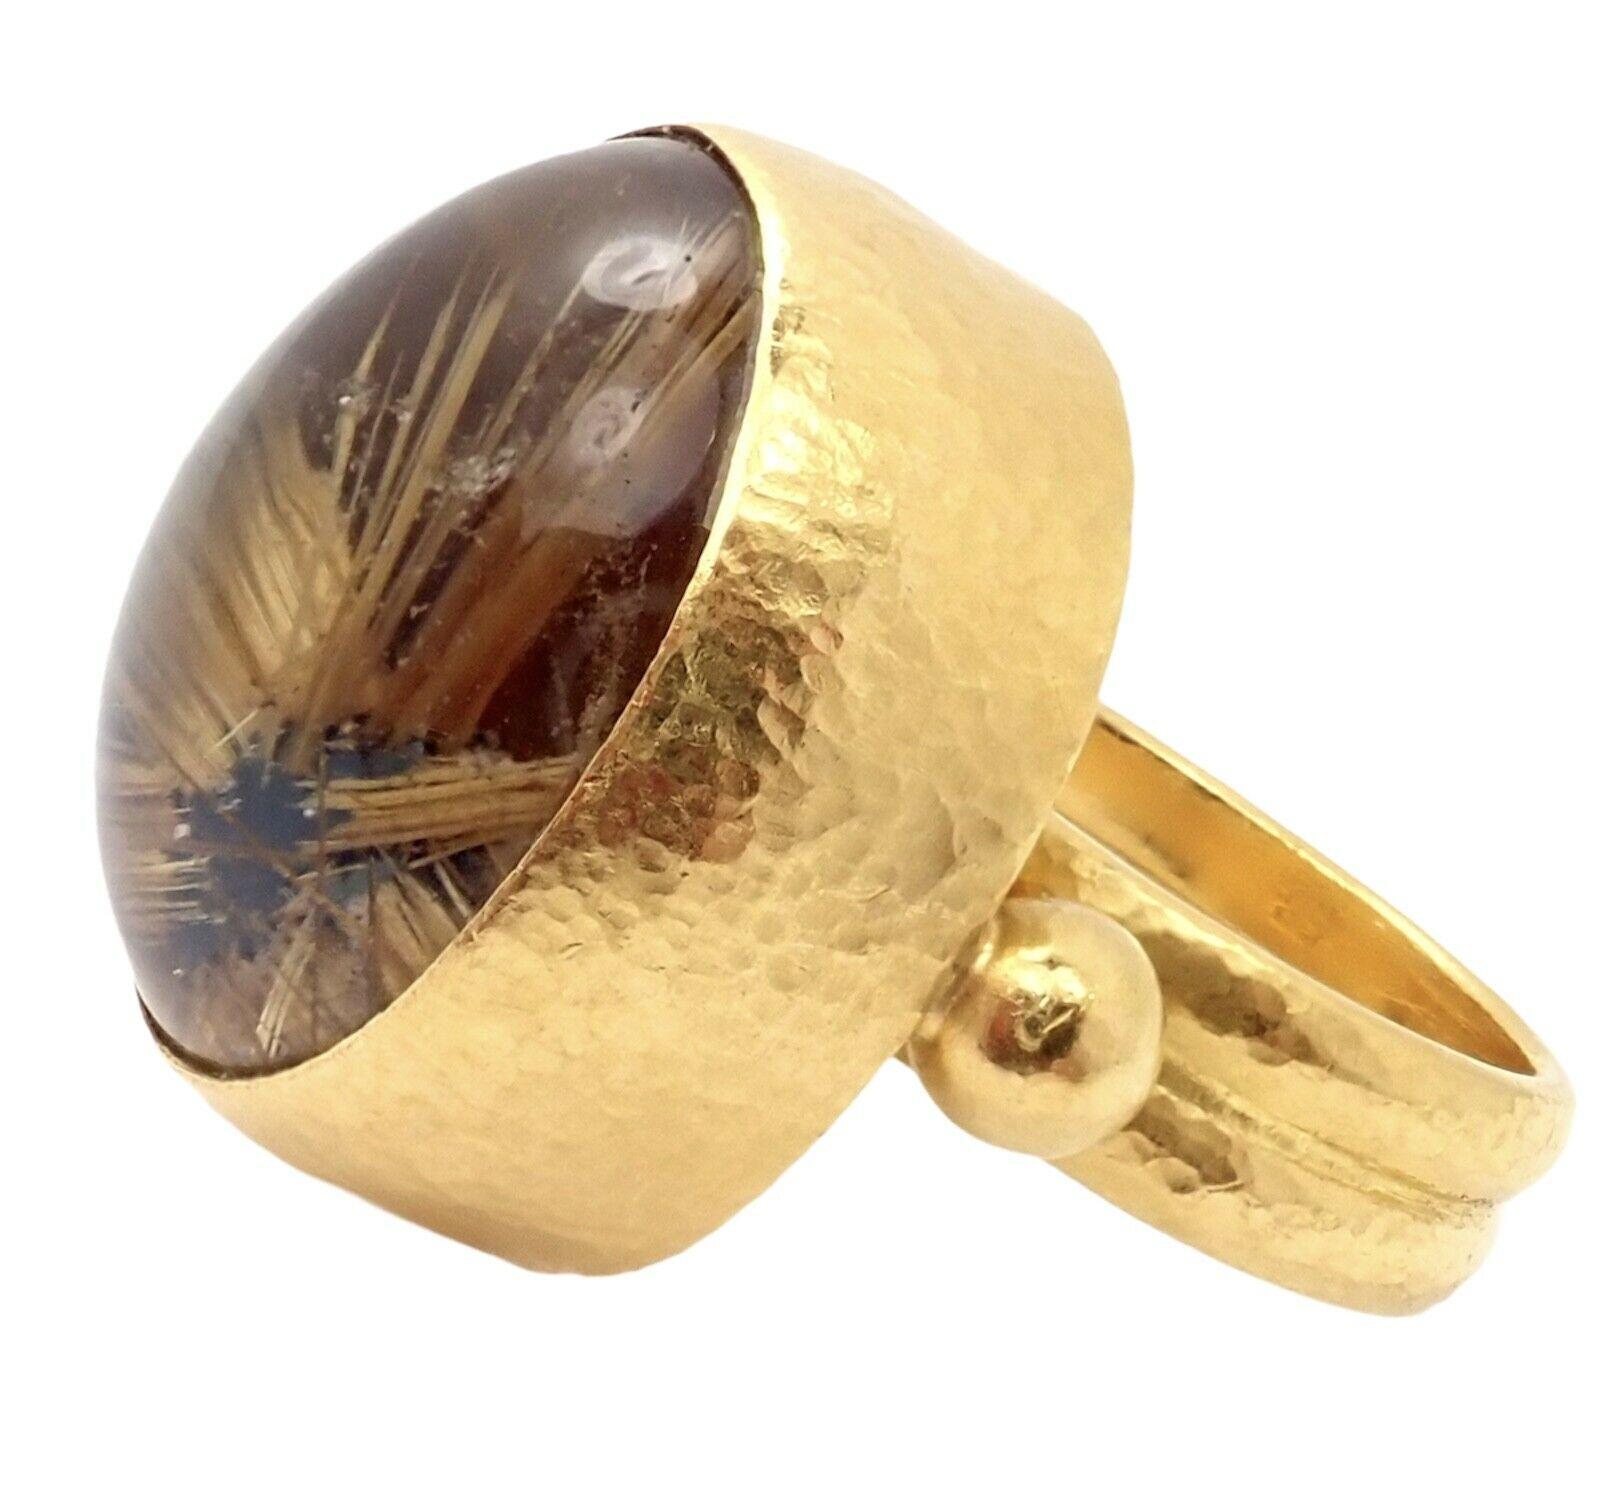 This striking 24k Yellow Gold ring with a large rutilated quartz comes from the legendary GURHAN. 
With 1 Large Rutilated Quartz - 21mm x 18mm
Measurements: 
Size: 6
Weight:  21.5 grams
Width: 23mm
Stamped Hallmarks: Gurhan .990 xxxxx(serial